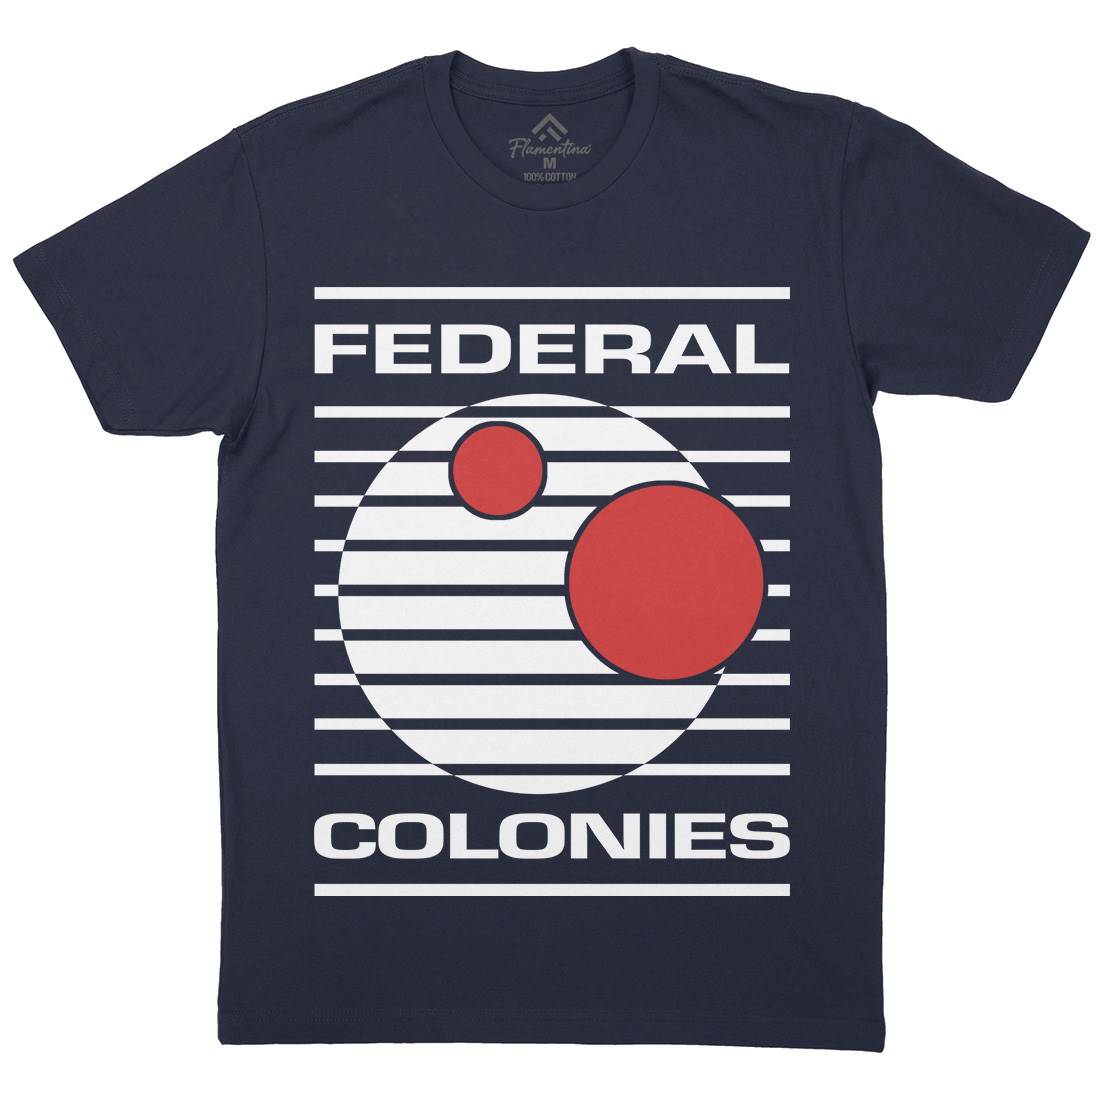 Federal Colonies Mens Crew Neck T-Shirt Space D409